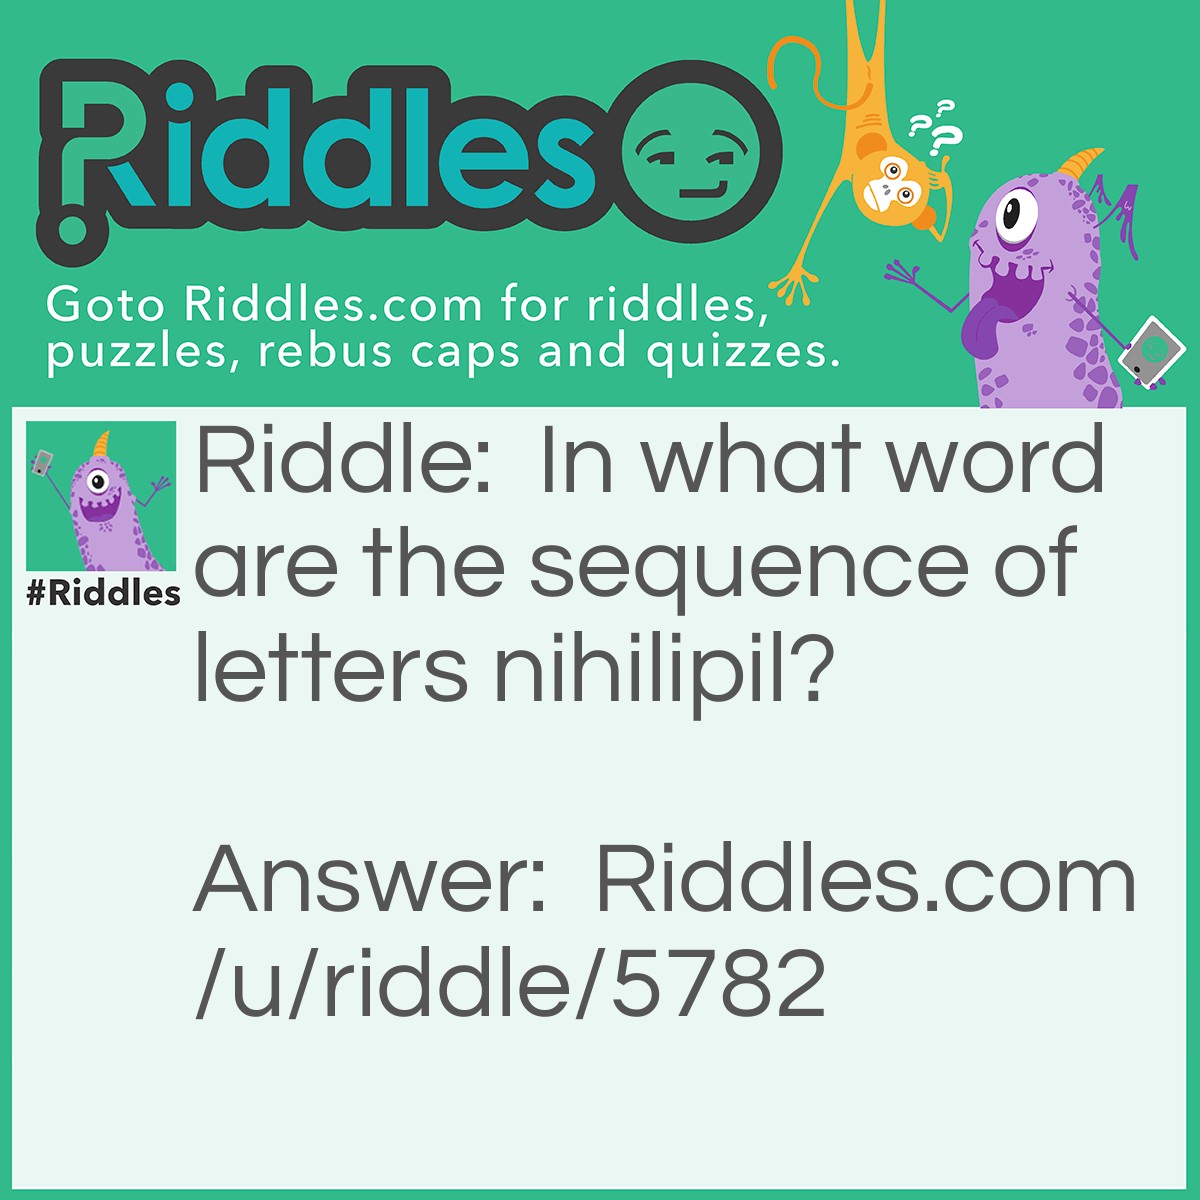 Riddle: In what word are the sequence of letters nihilipil? Answer: Floccinauci-nihilipil-ification.